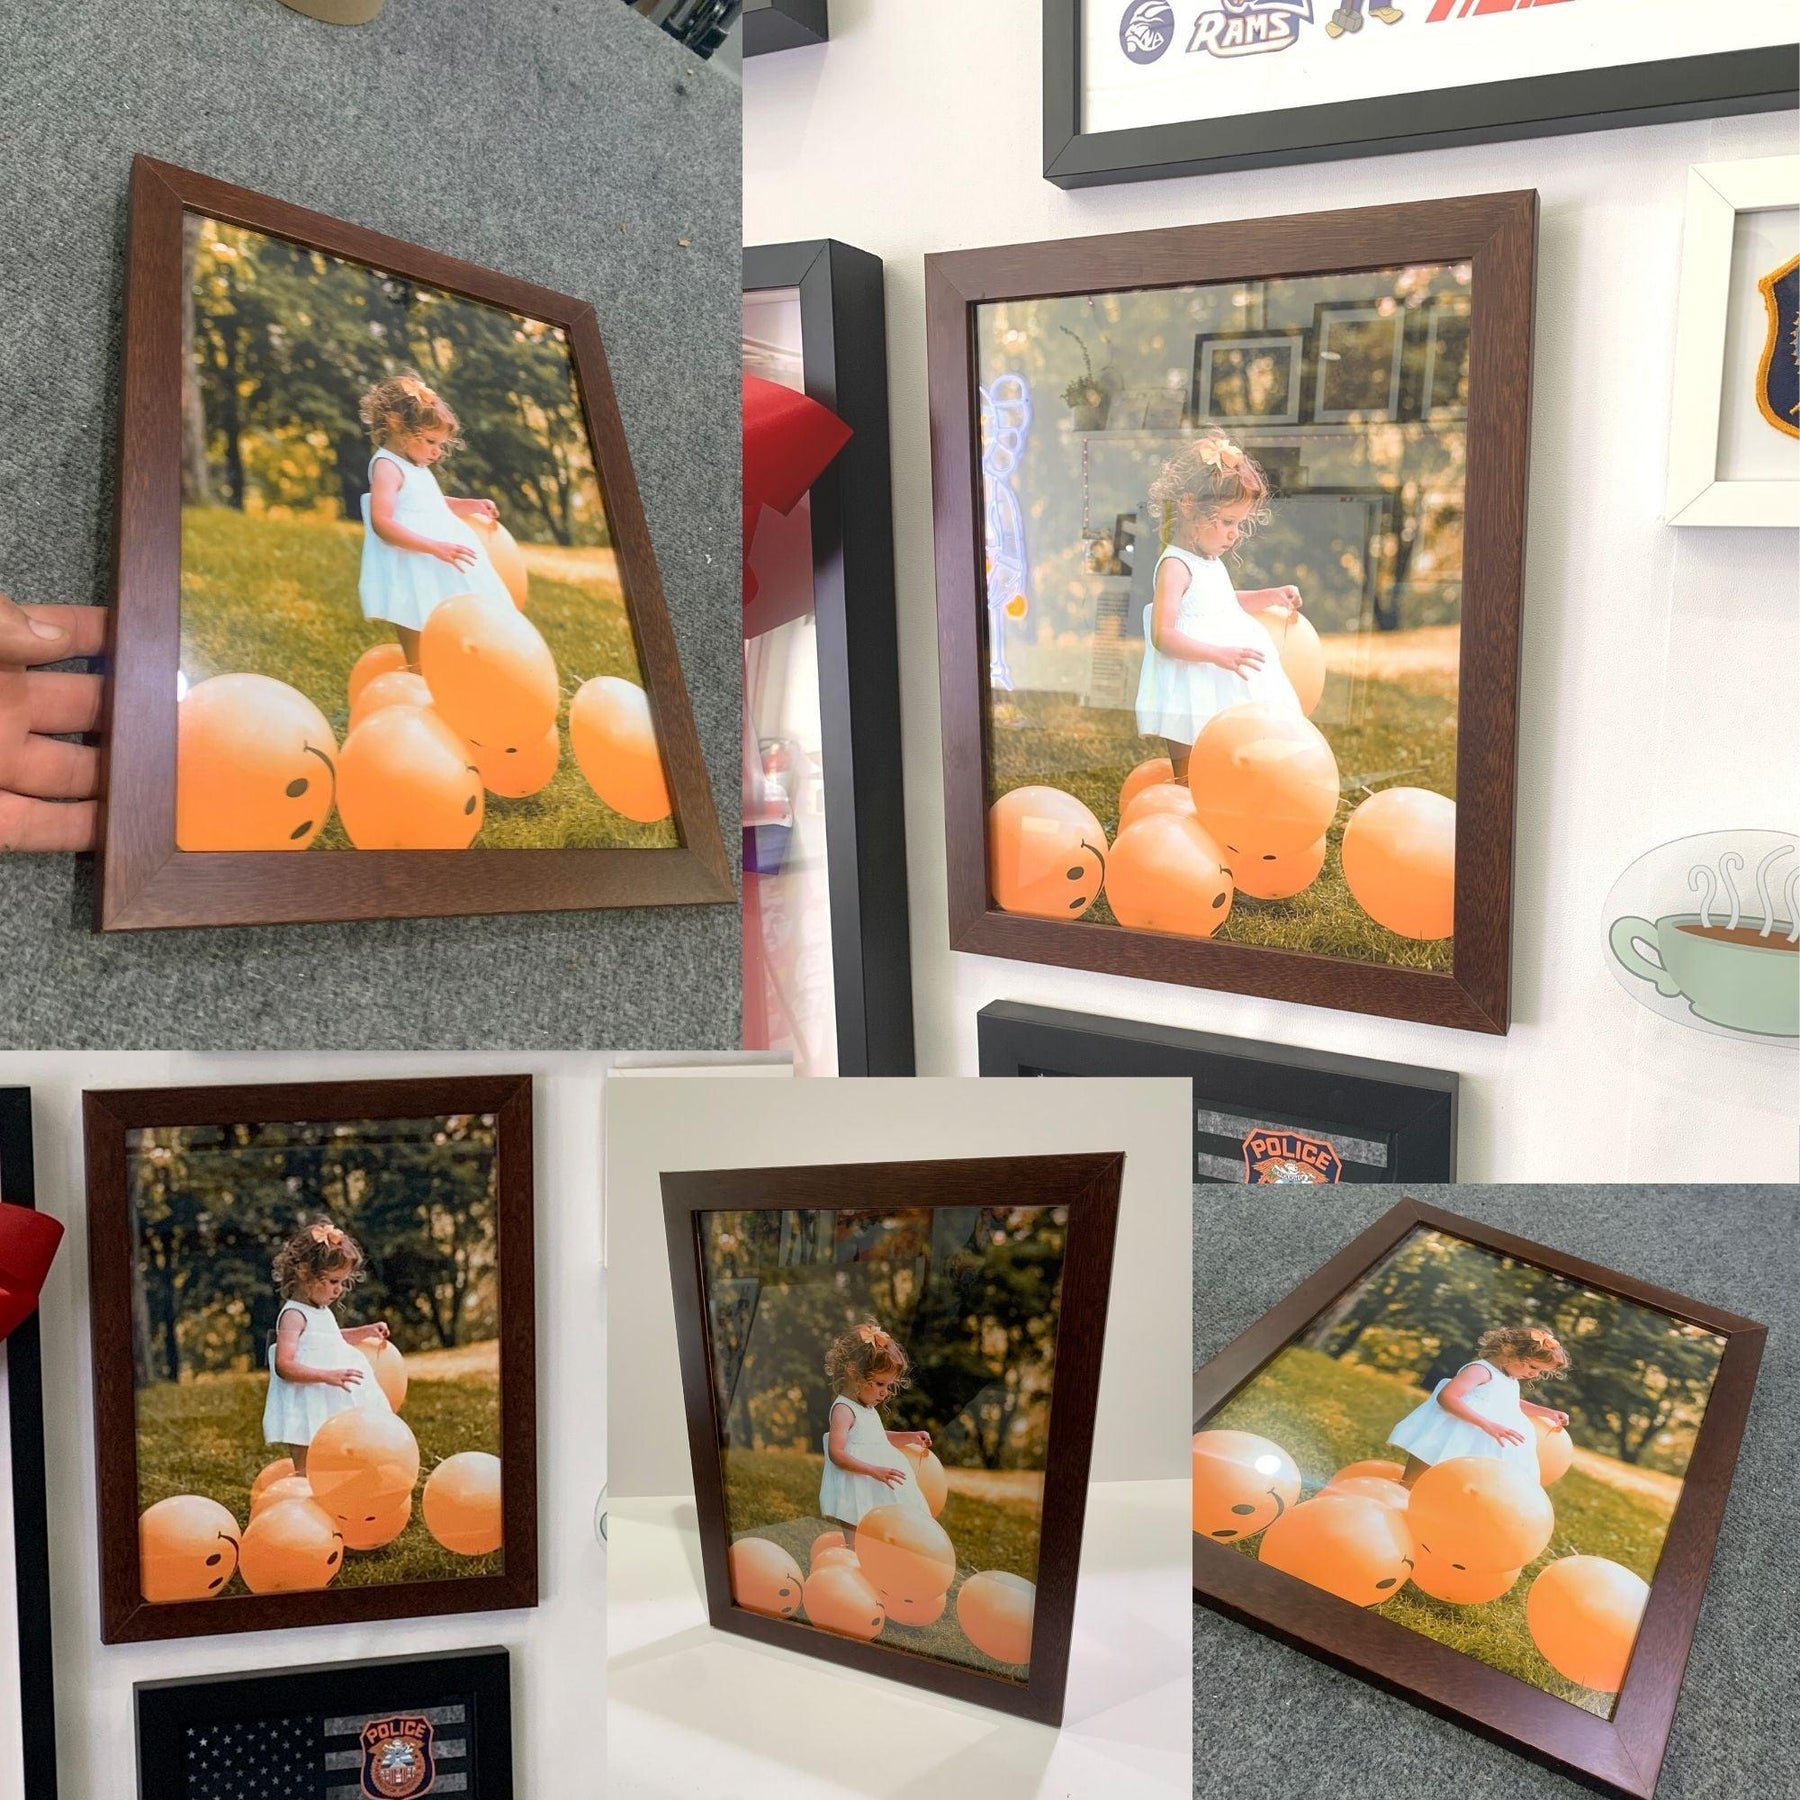 Best Custom Framing Services New Jersey Near New York - Your Local Frame Shop Company - Modern Memory Design Picture frames - NJ Frame shop Custom framing